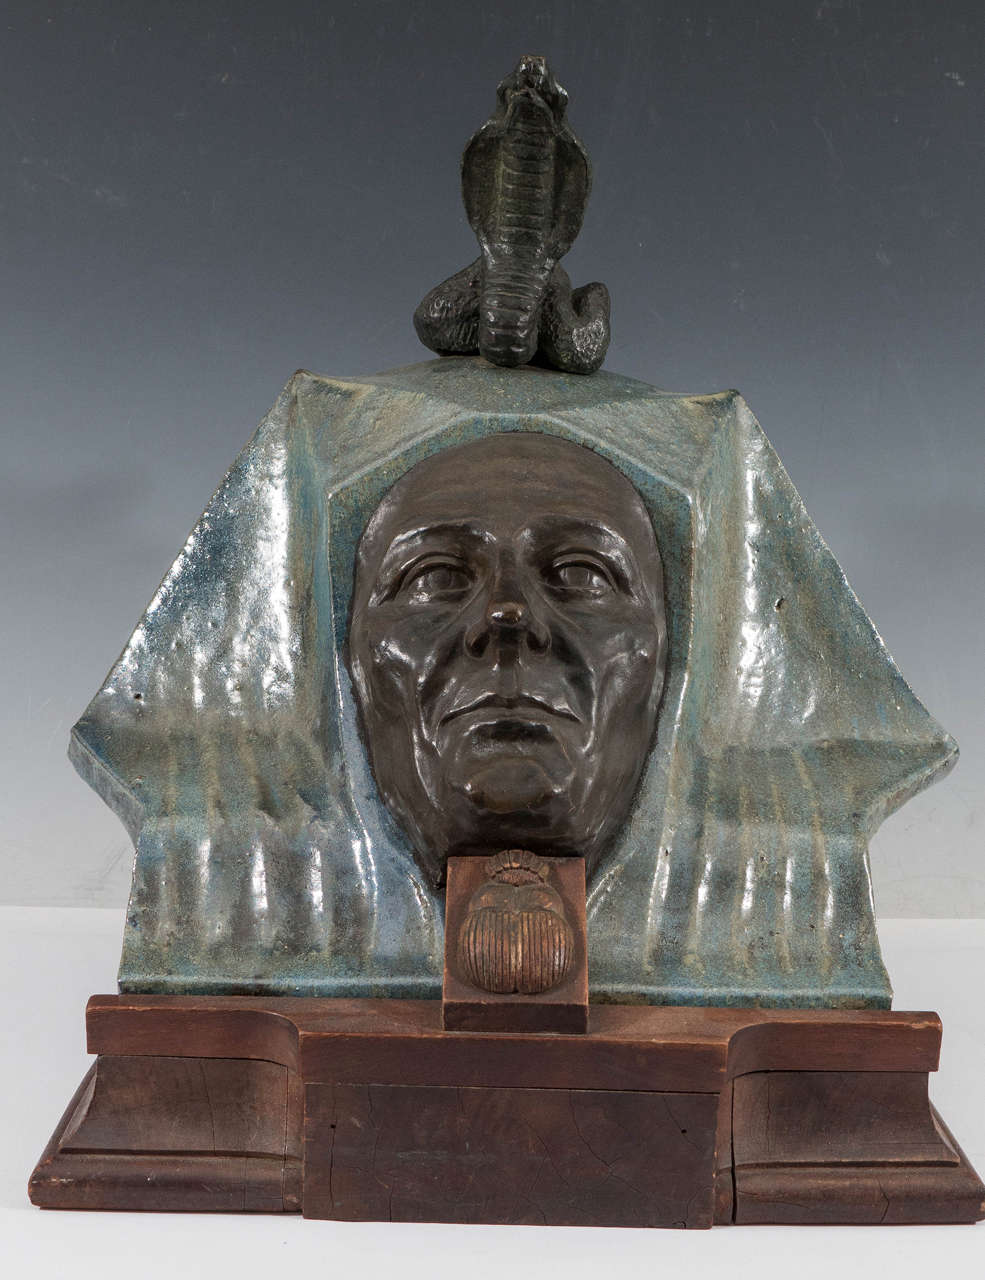 A highly unique antique sculpture of an Egyptian funerary mask, possibly French in origin, produced early 1900s, with classically rendered bronze face, inset against a glazed green and blue terracotta headdress, with a coiling cobra in bronze as